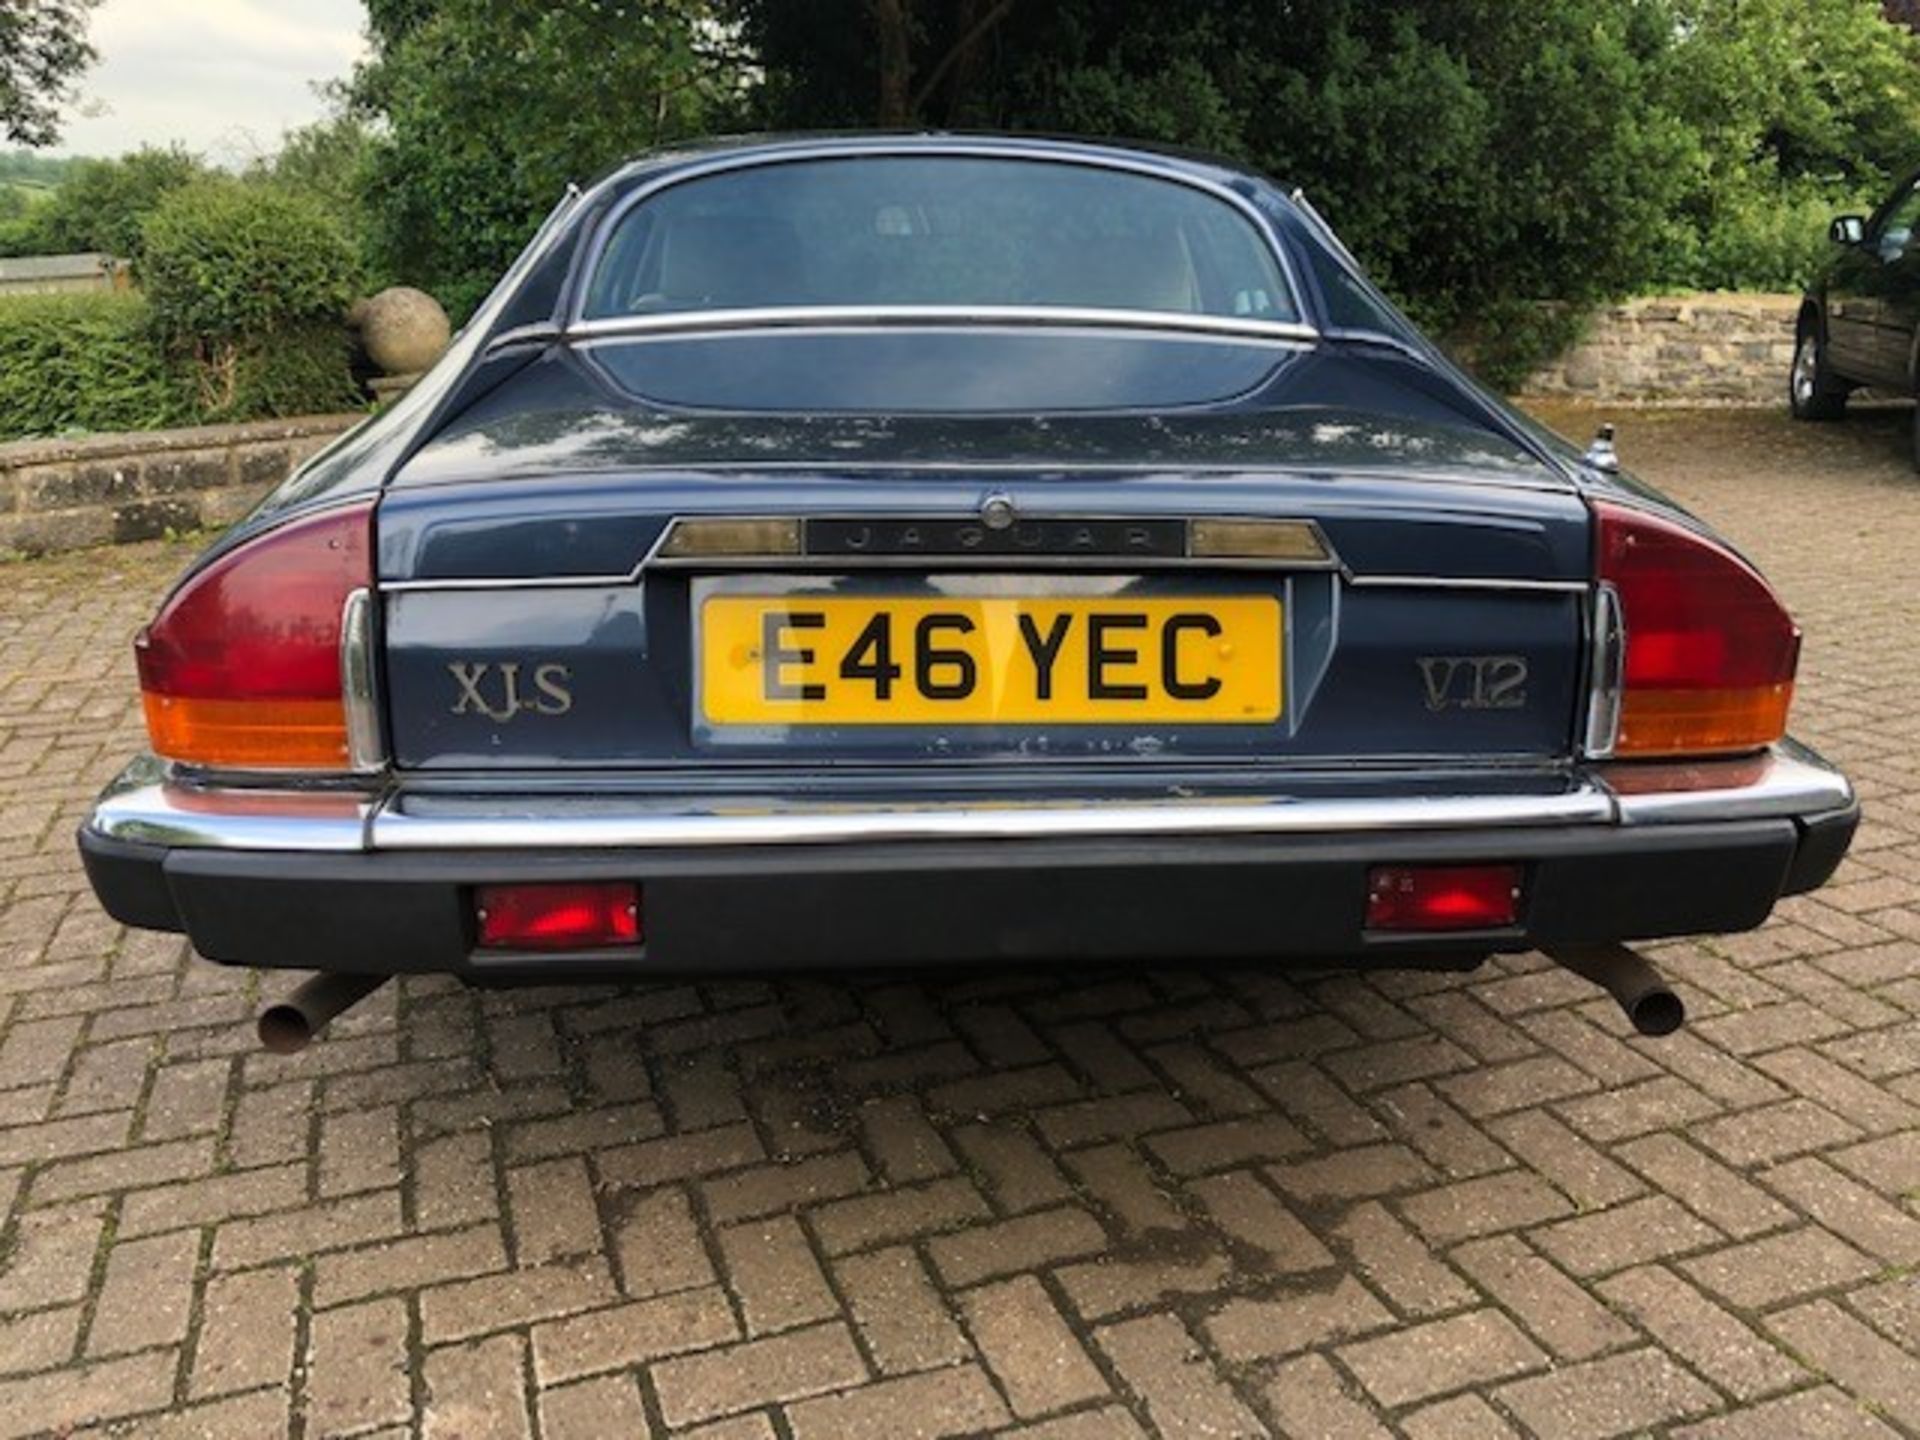 1988 Jaguar XJ-S HE Auto Registration number E46 YEC Bought in 1997 Last driven in 1999 26,540 - Image 9 of 49